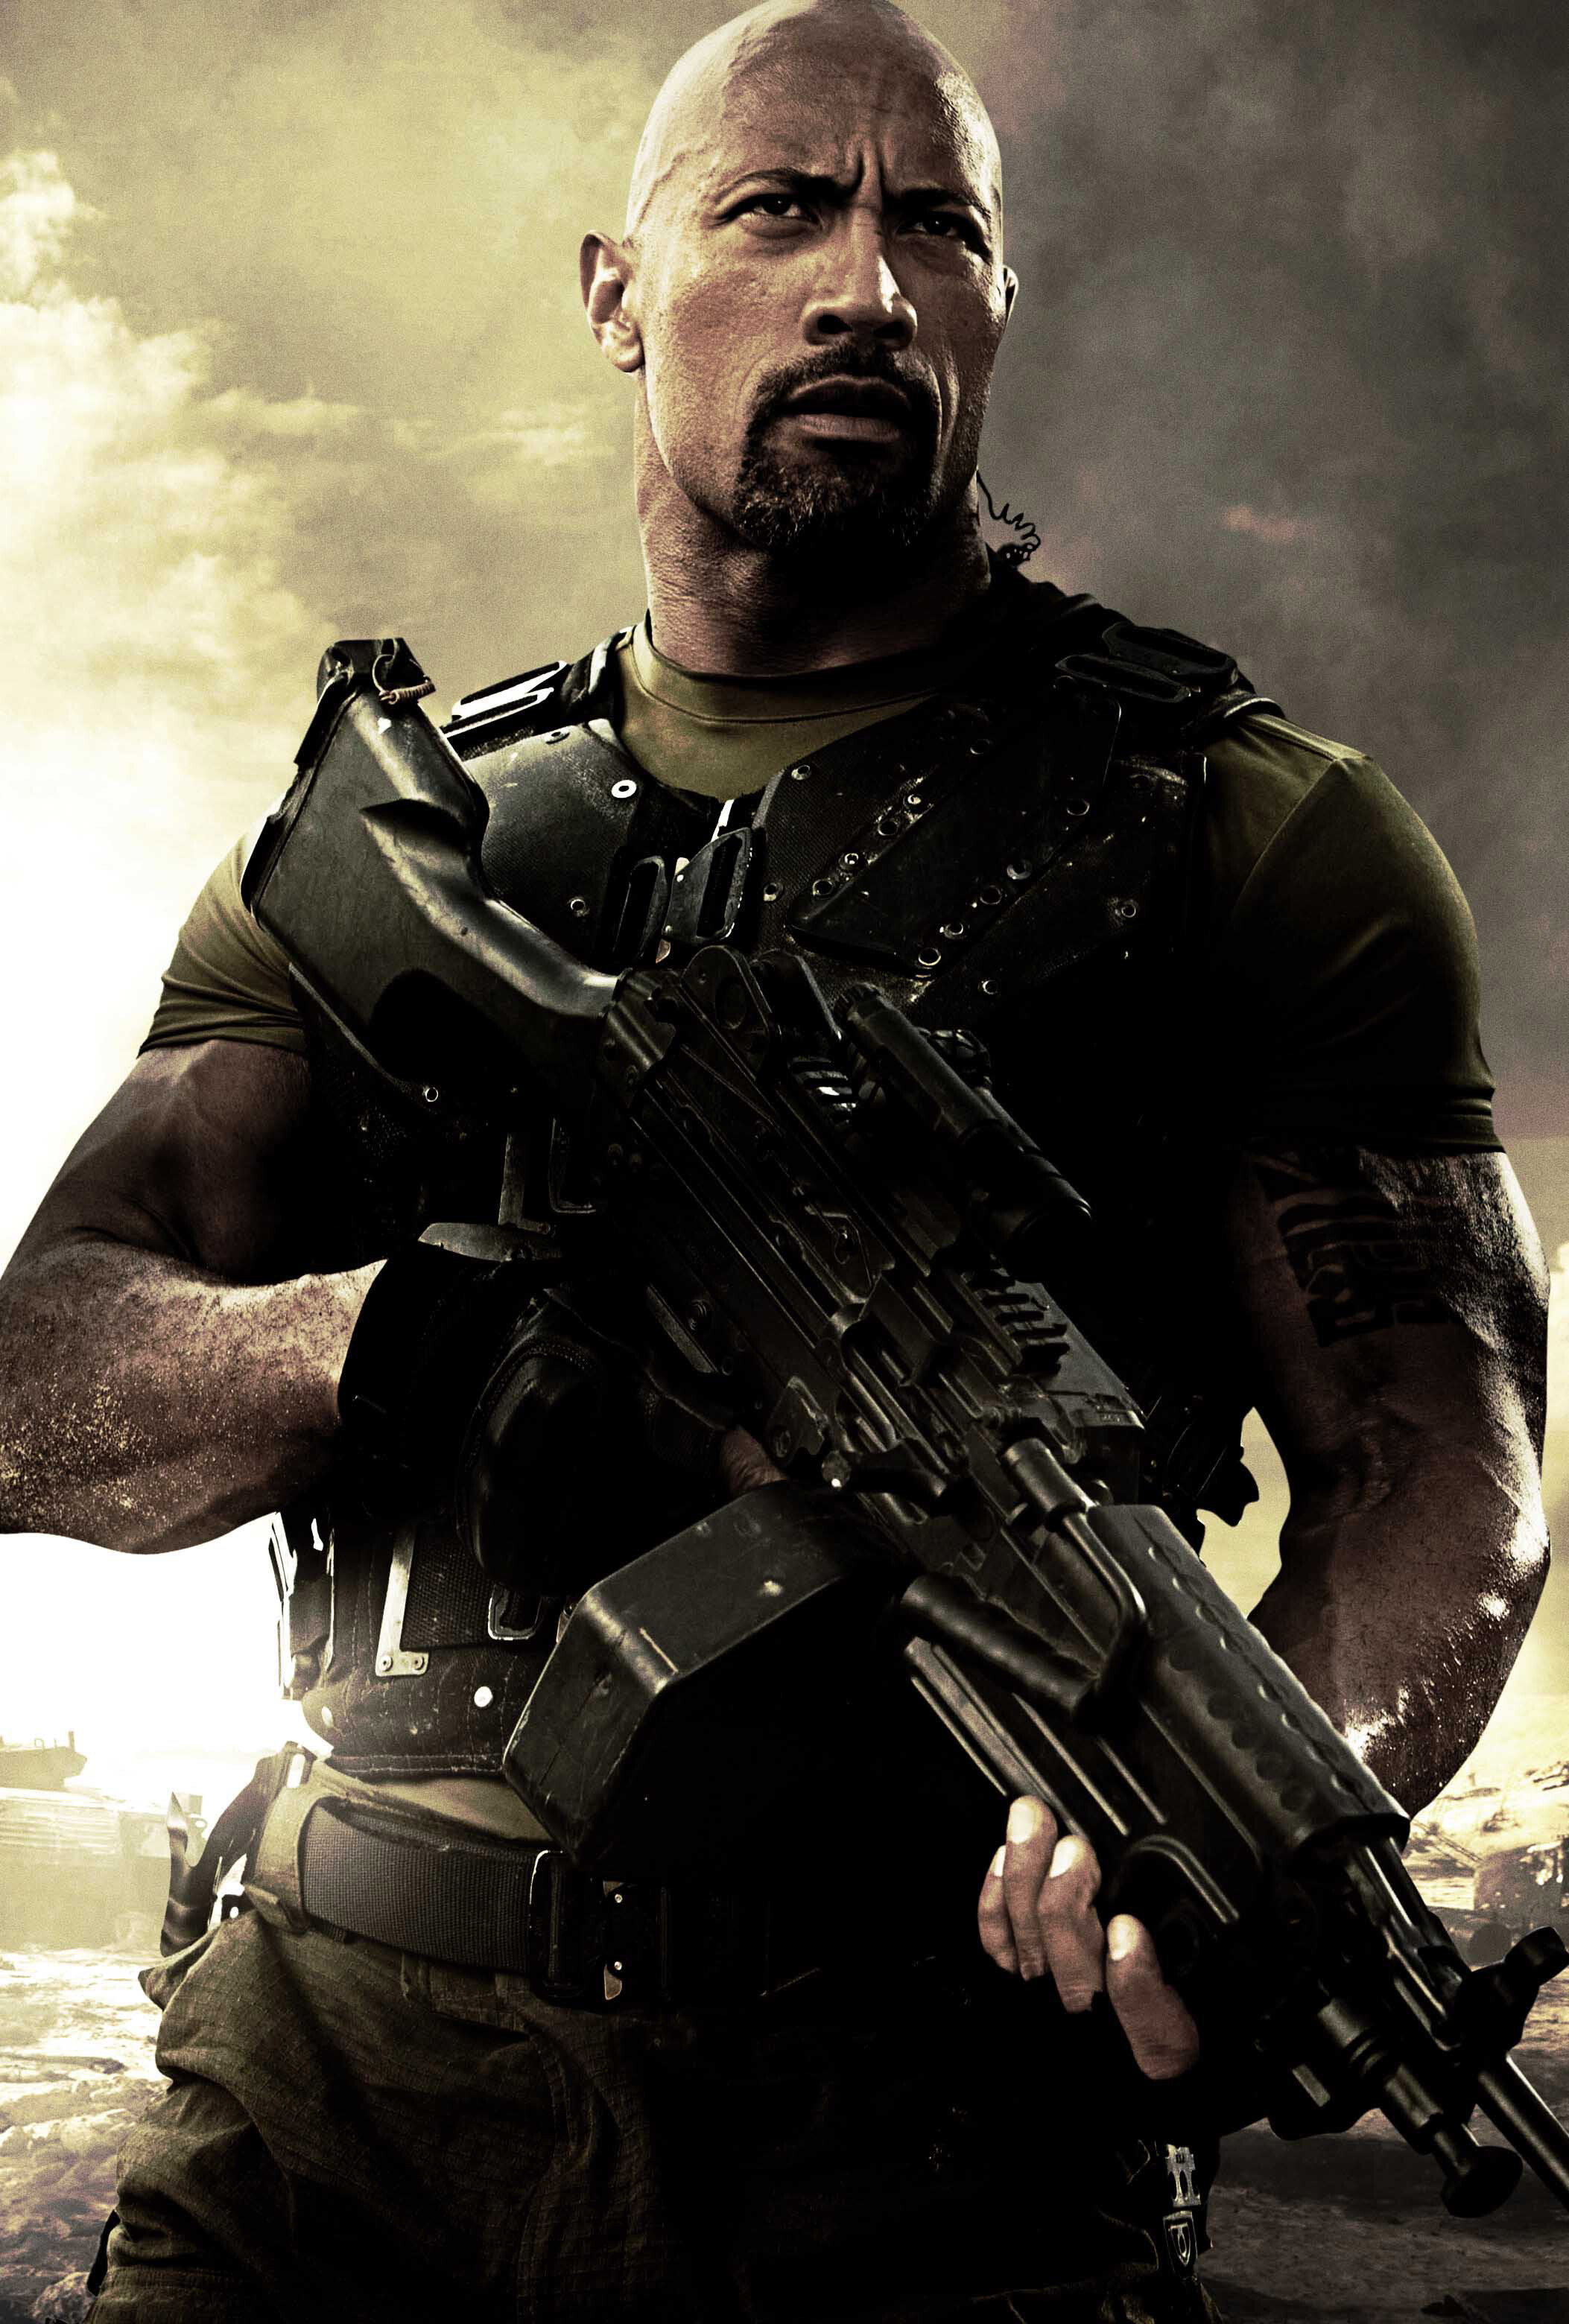 G.I. Joe (Movie): Dwayne Douglas Johnson, Also Known By His Ring Name "The Rock", An American Actor, Businessman, And Former Professional Wrestler. 2110x3120 HD Background.